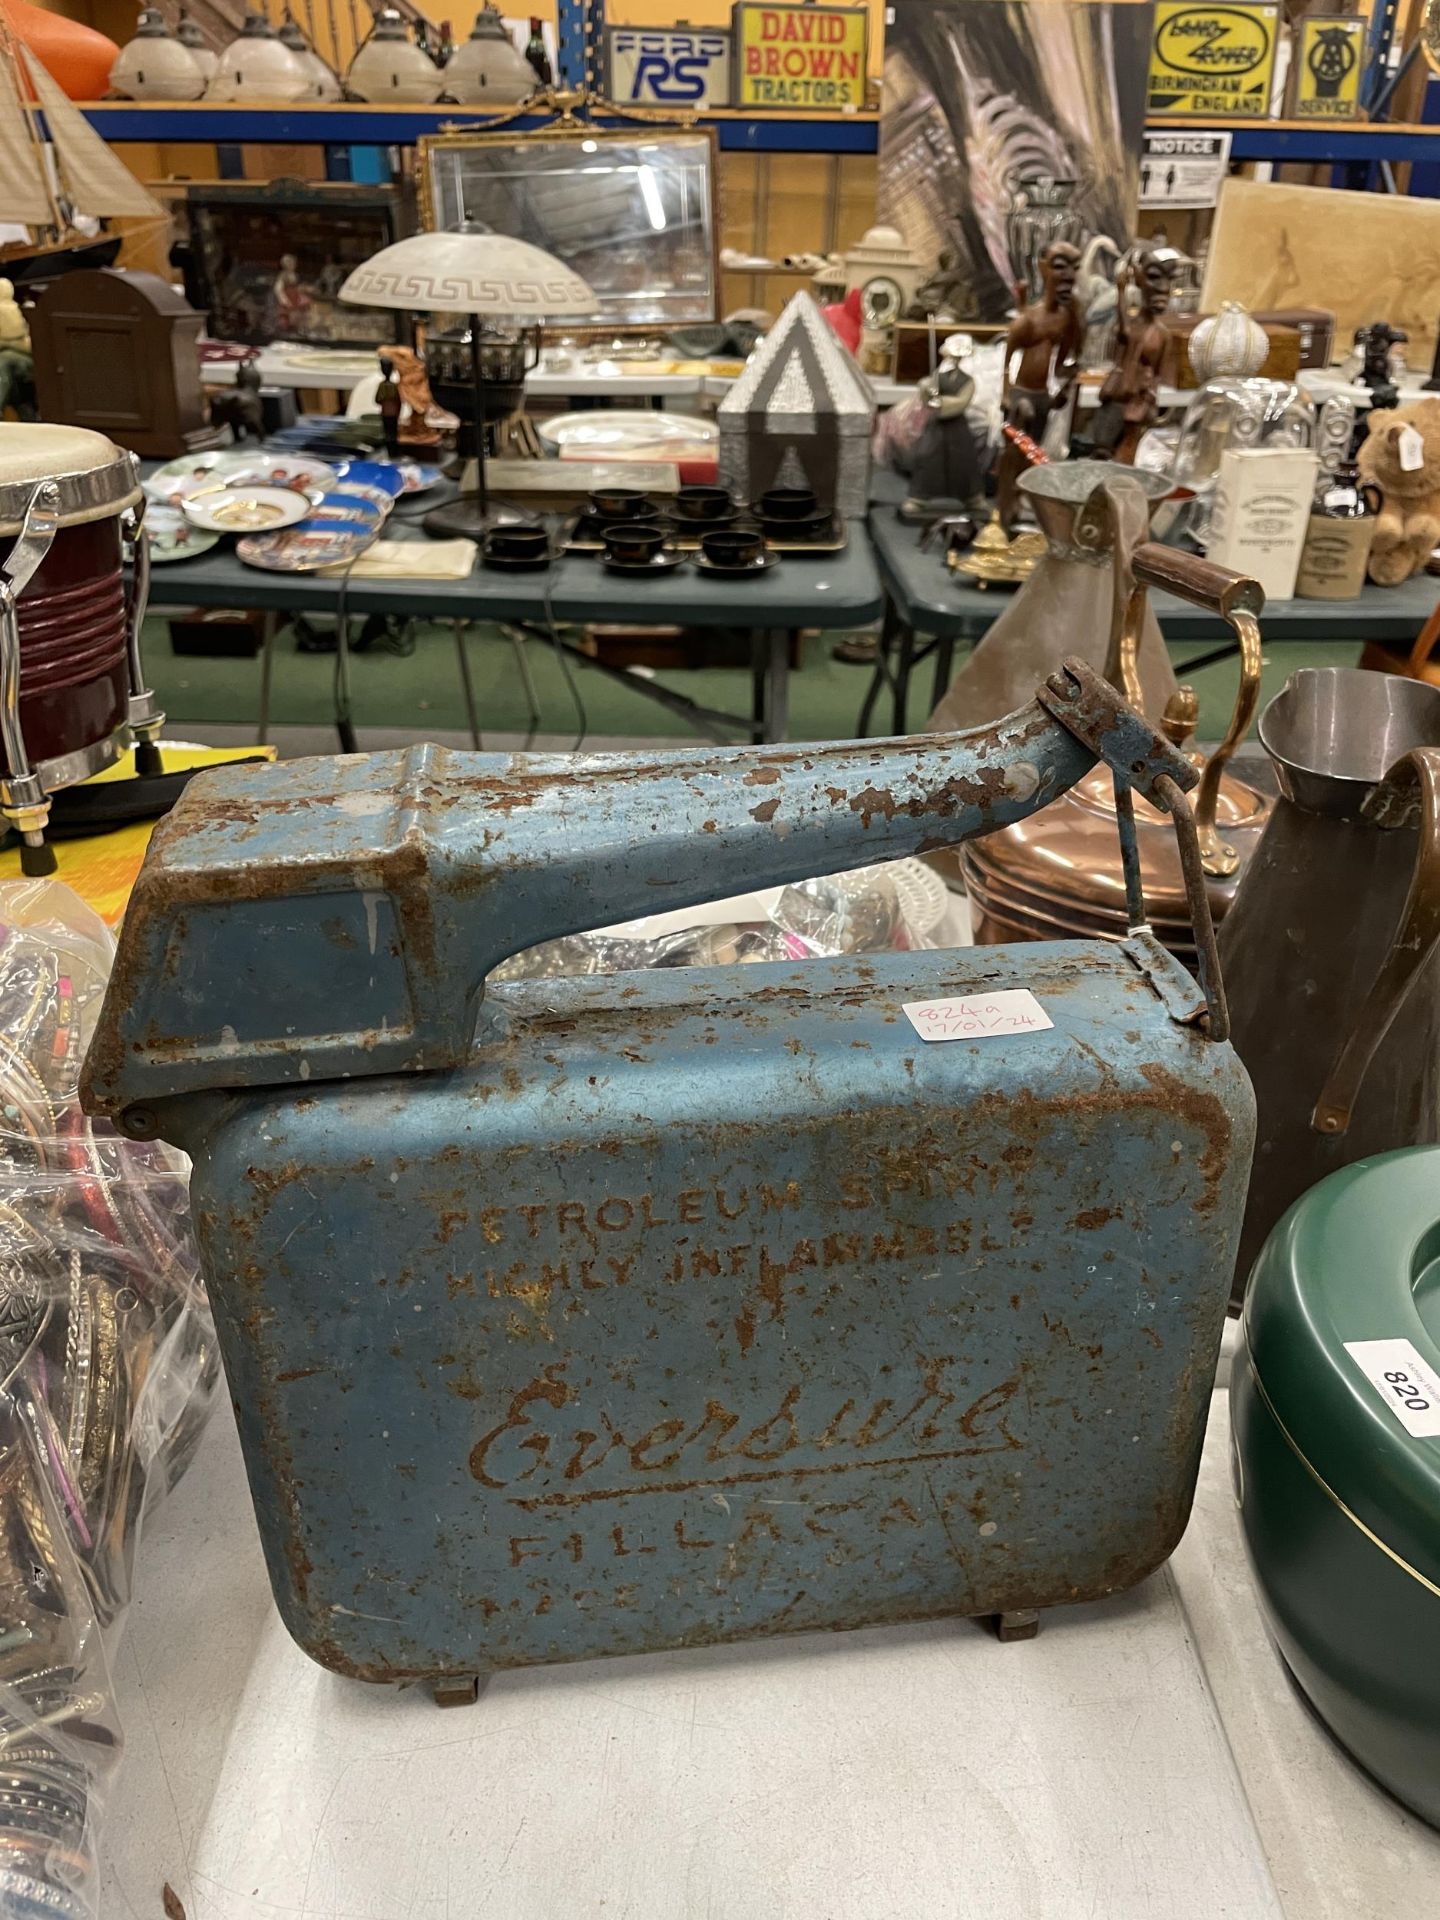 A VINTAGE EVERSURE PETROL CAN